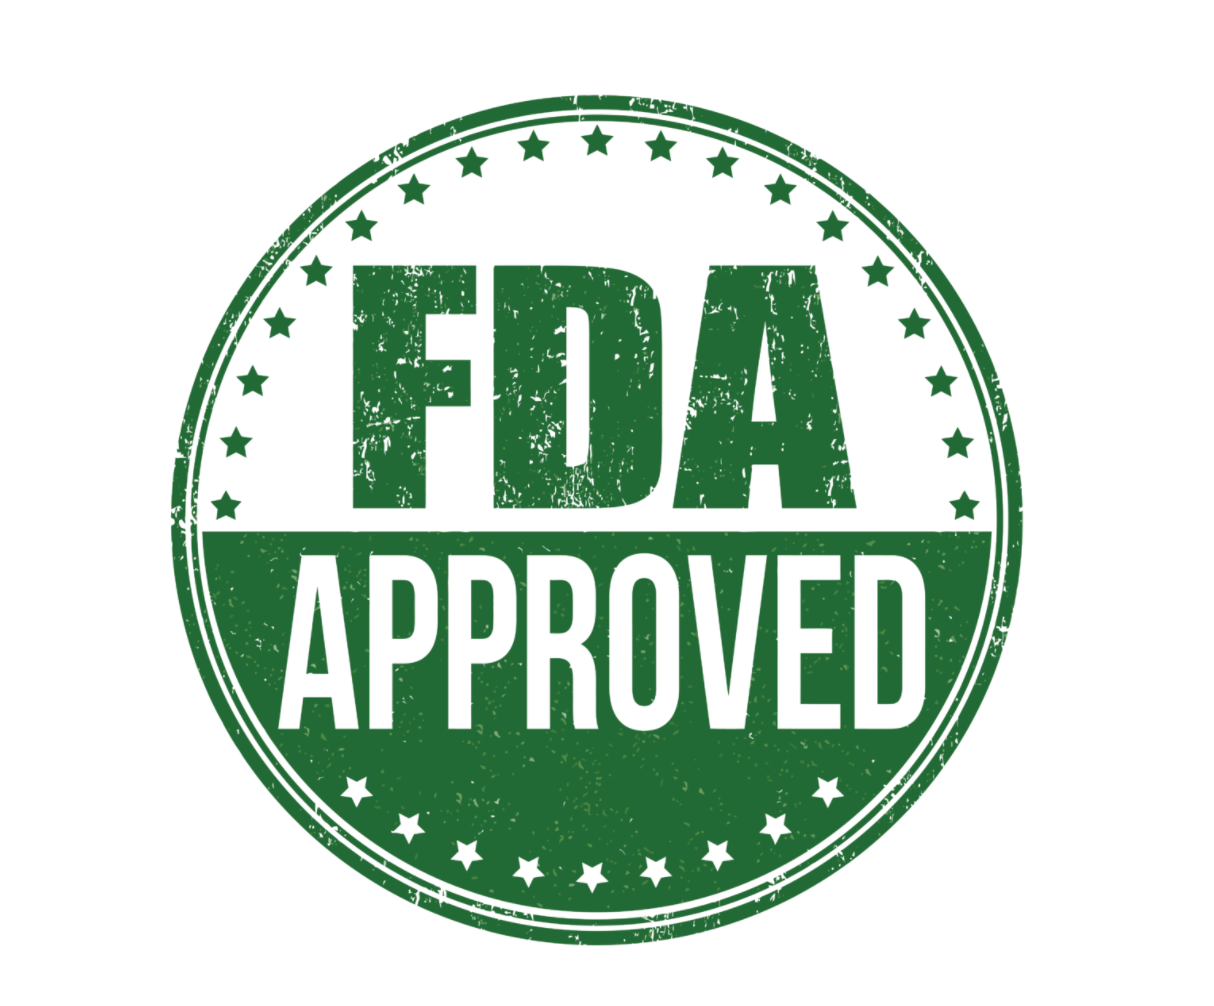 FDA Approves 2.0 mg Dose of Semaglutide Injection for Type 2 Diabetes